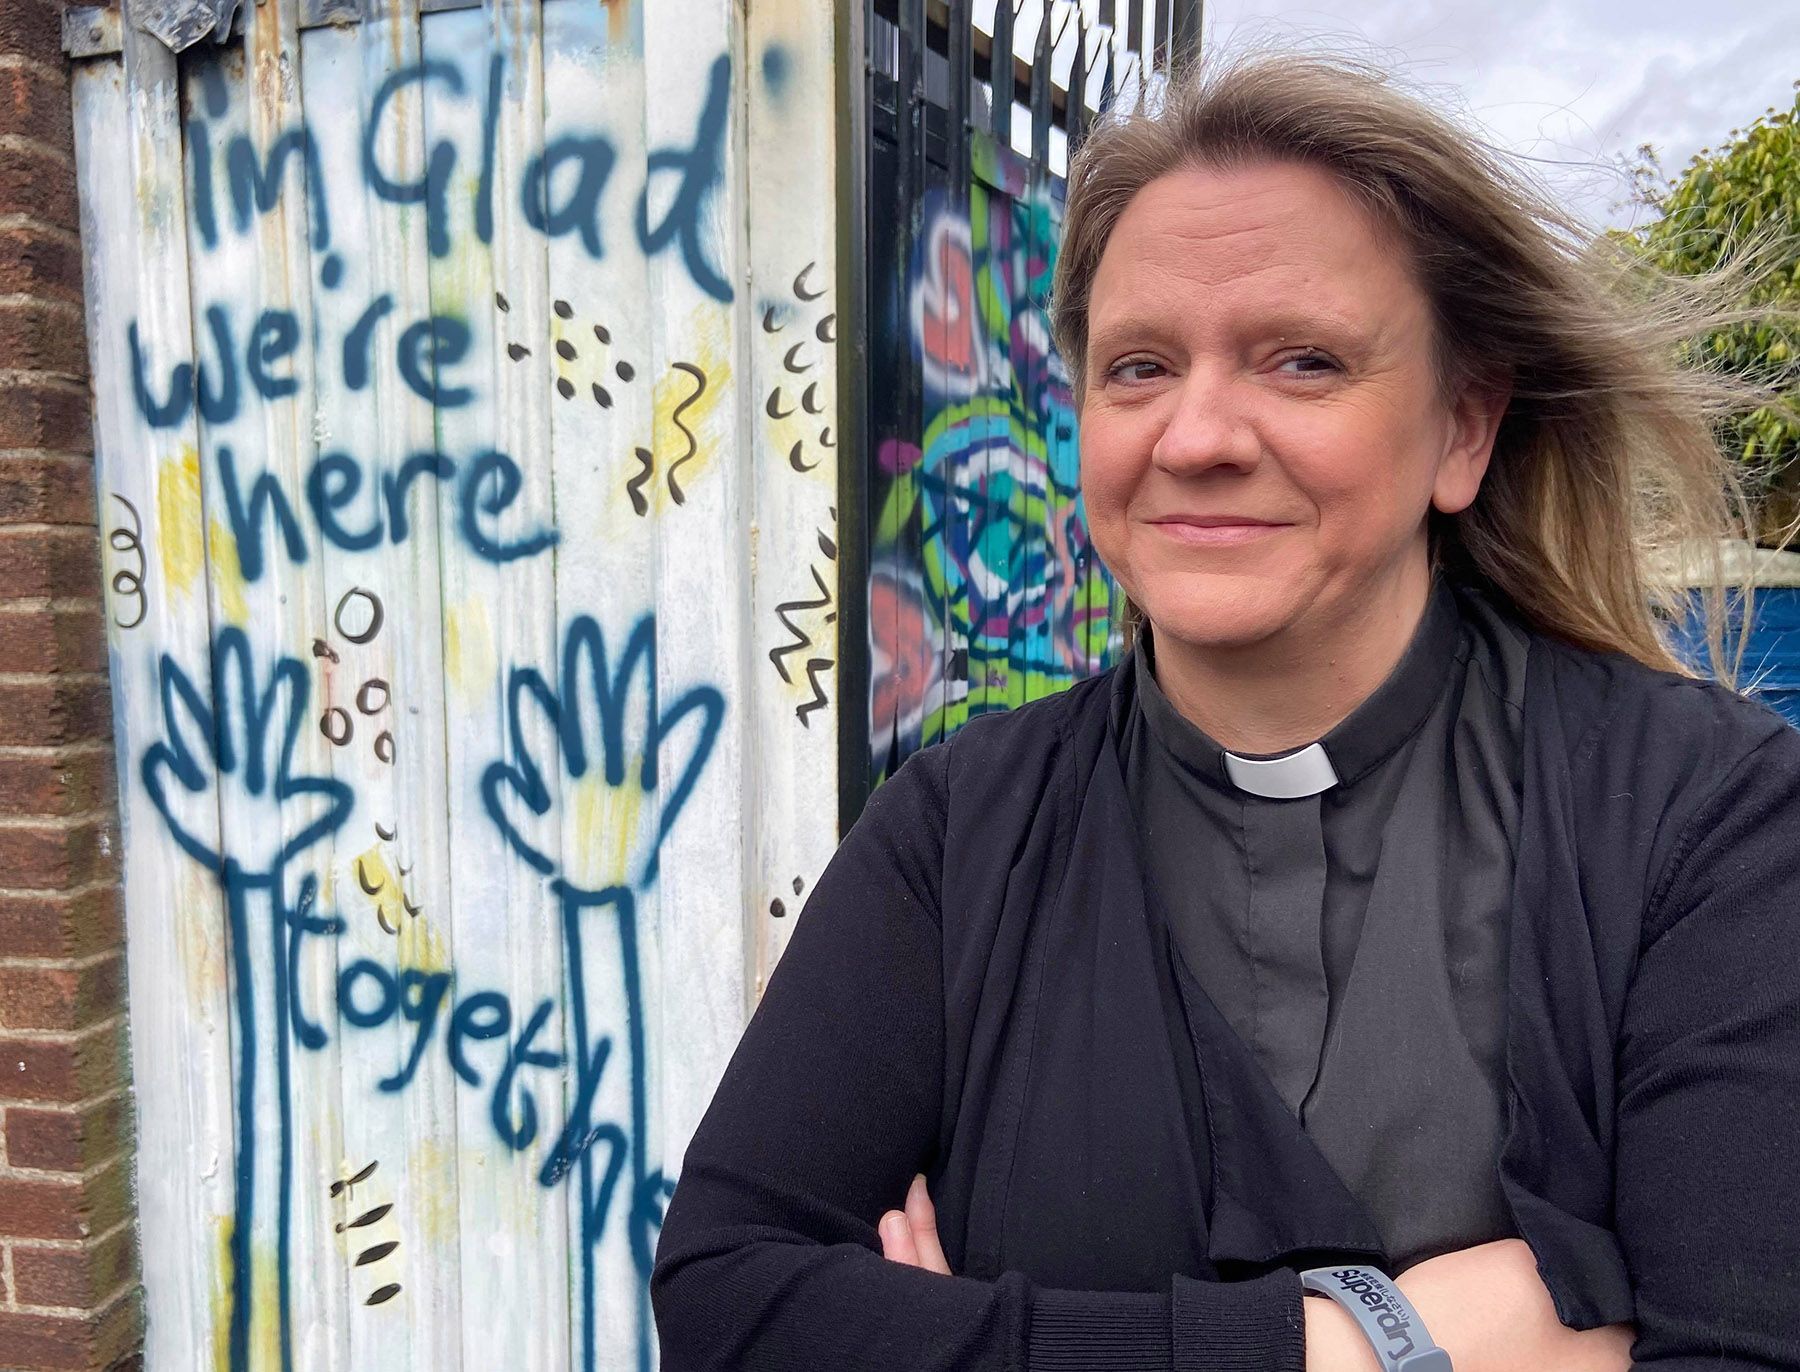 BE SURE TO WEAR FLOWERS IN YOUR HAIR: Rev Karen Sethurman on the peace line in West Belfast